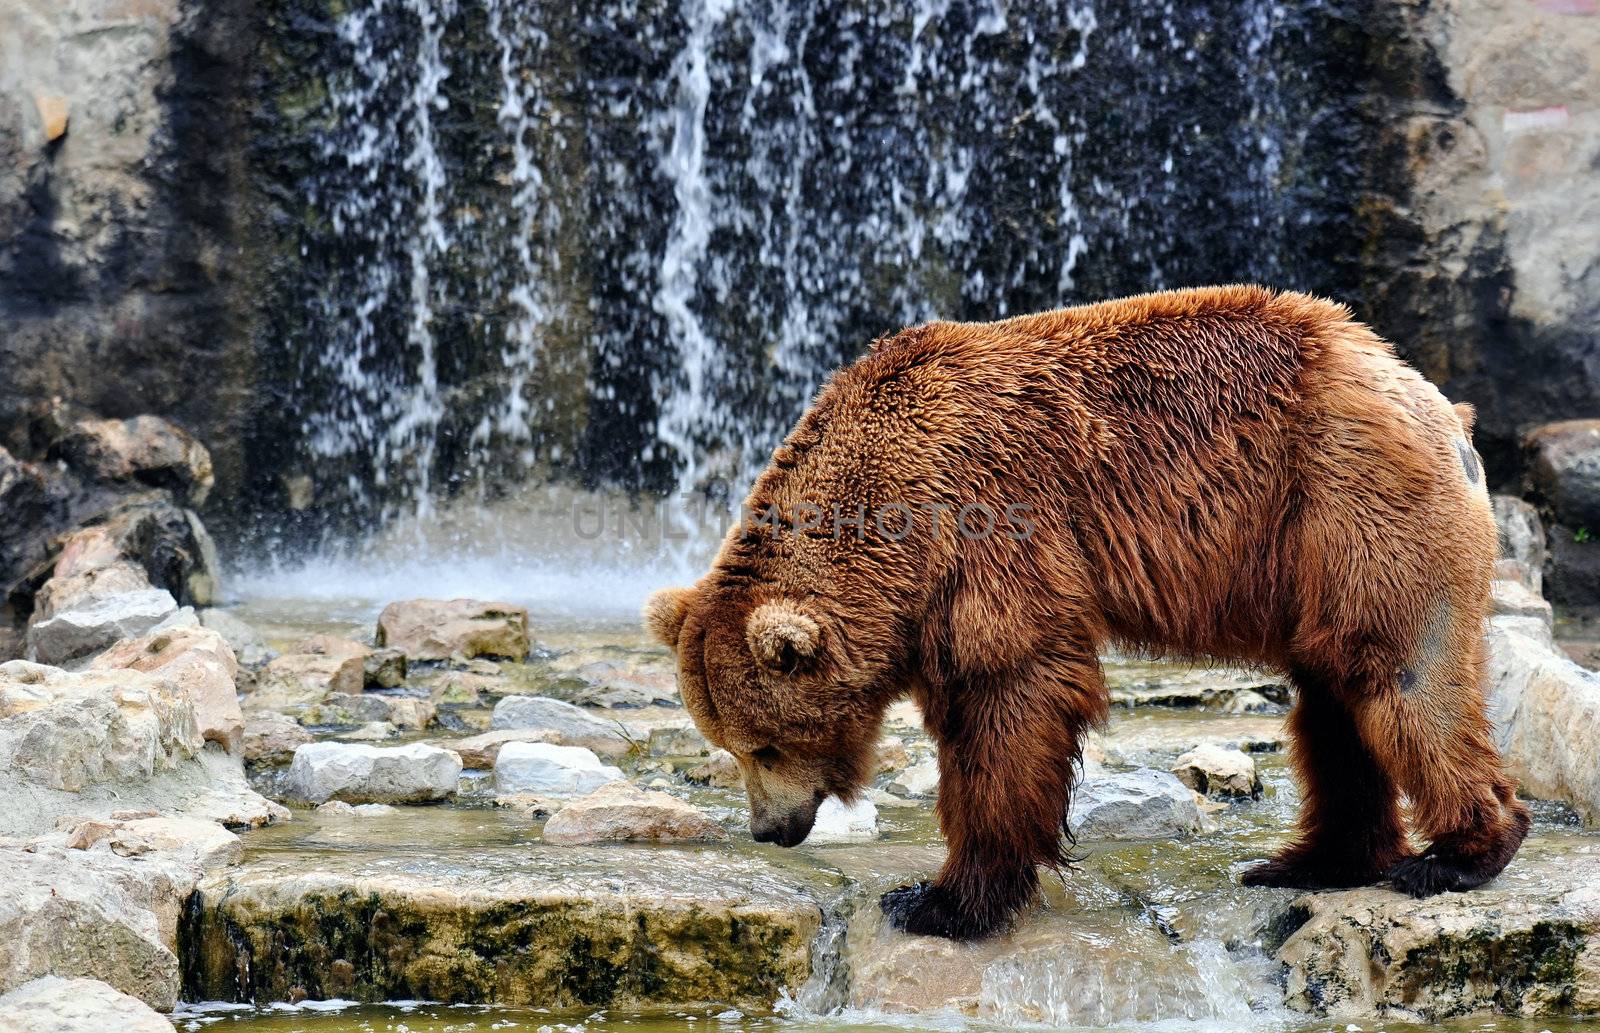 Brown bear (Ursus arctos) is a large bear distributed across much of northern Eurasia and North America. Adult bears generally weigh between 300 and 680 kilograms (660 and 1,500 lb) and its largest subspecies is the Kodiak bear